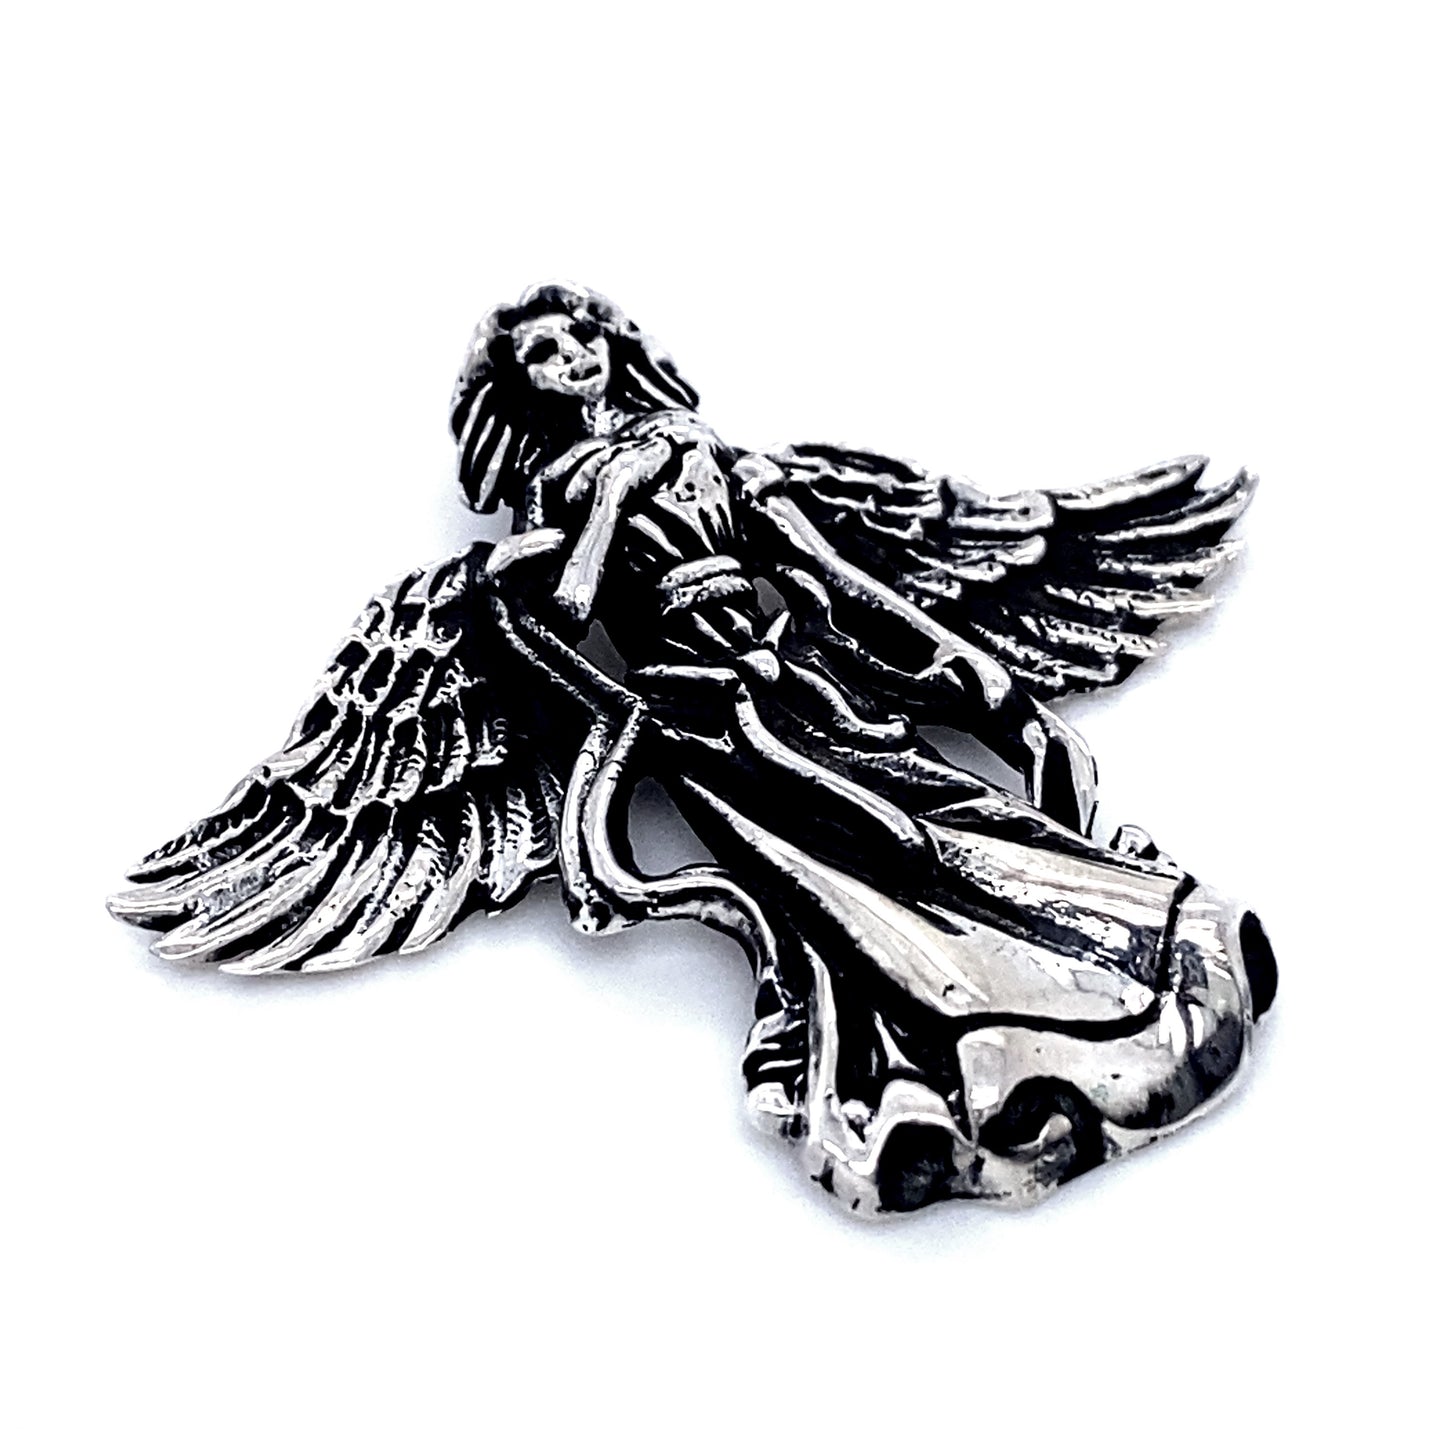 An intricately carved Flowing Angel Pendant With Hand Over Heart with detailed wings and flowing robe, showcasing antiqued detailing, is shown against a white background.